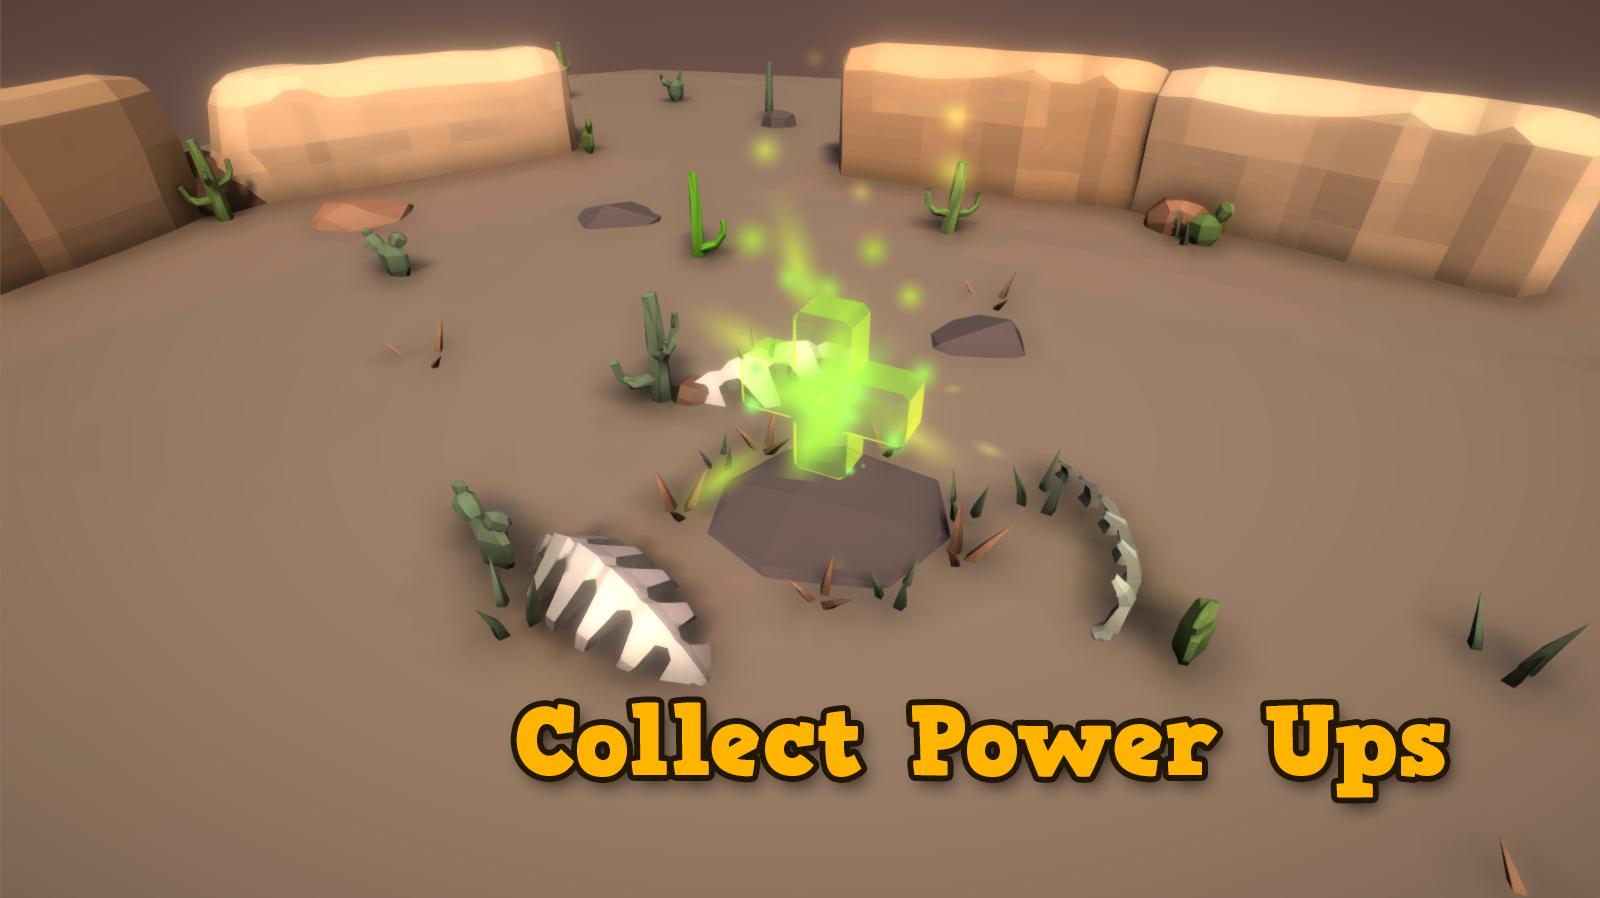 Tank Brawl 1v1 Free Multiplayer Battle Arena For Android Apk Download - 1v1 arena 2player roblox